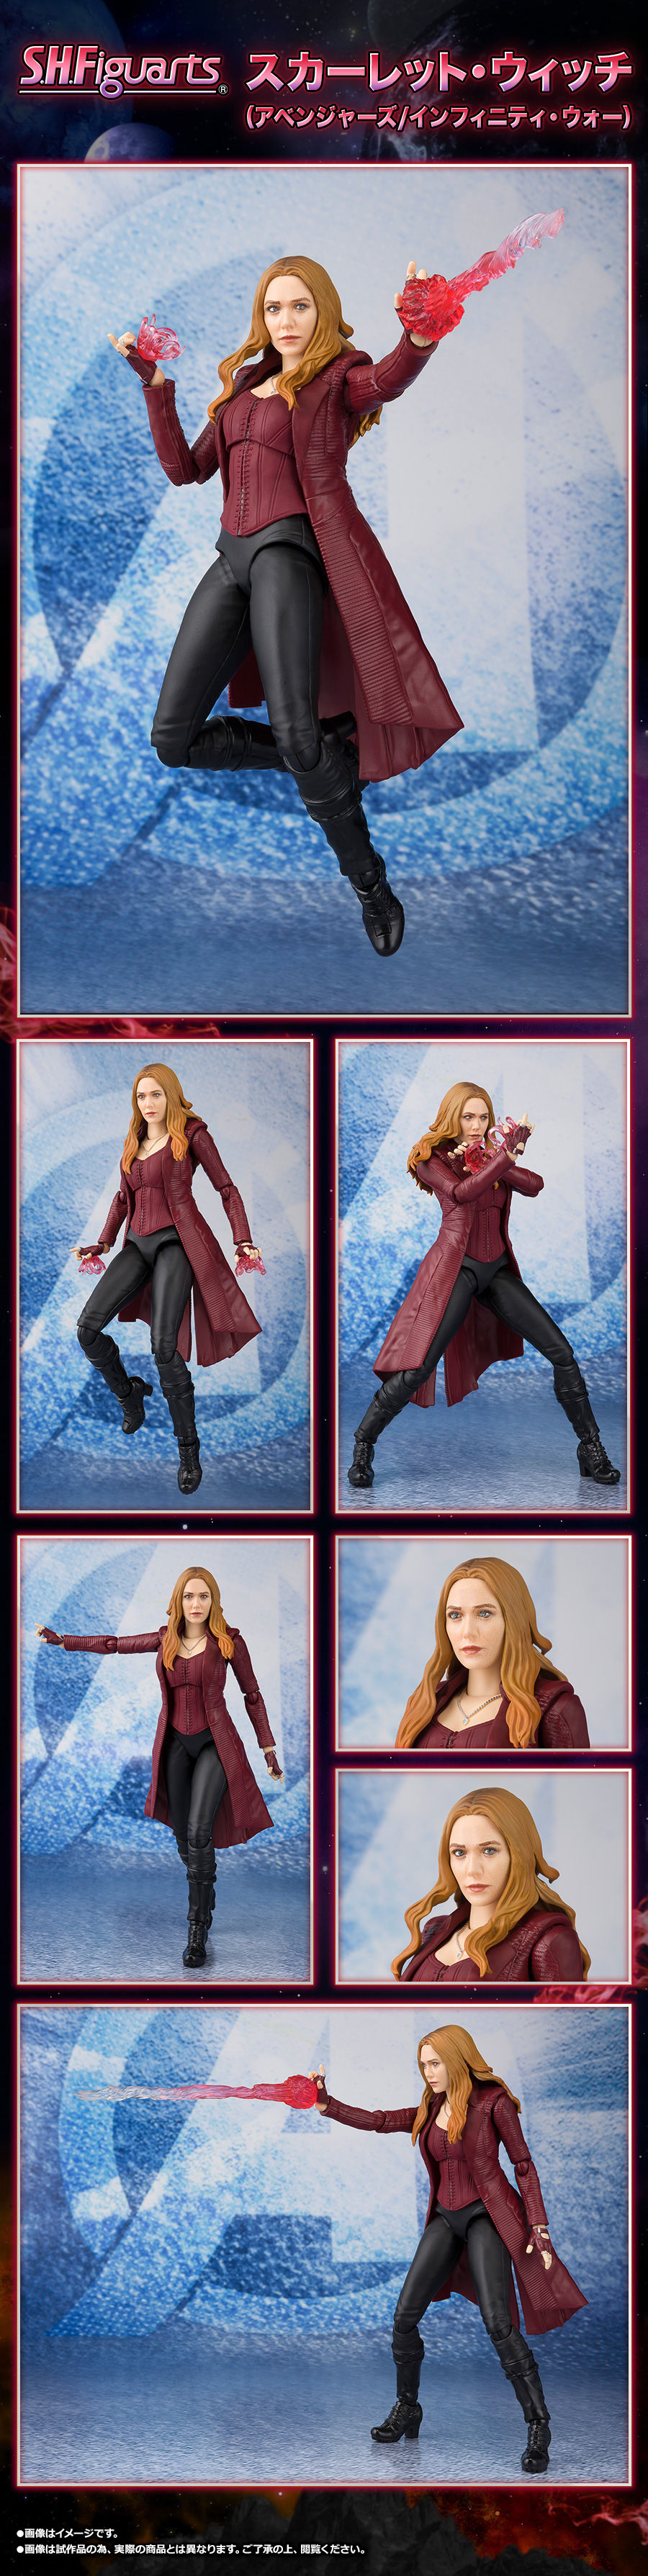 S.H.Figuarts Scarlet Witch (Avengers: Infinity War) Action